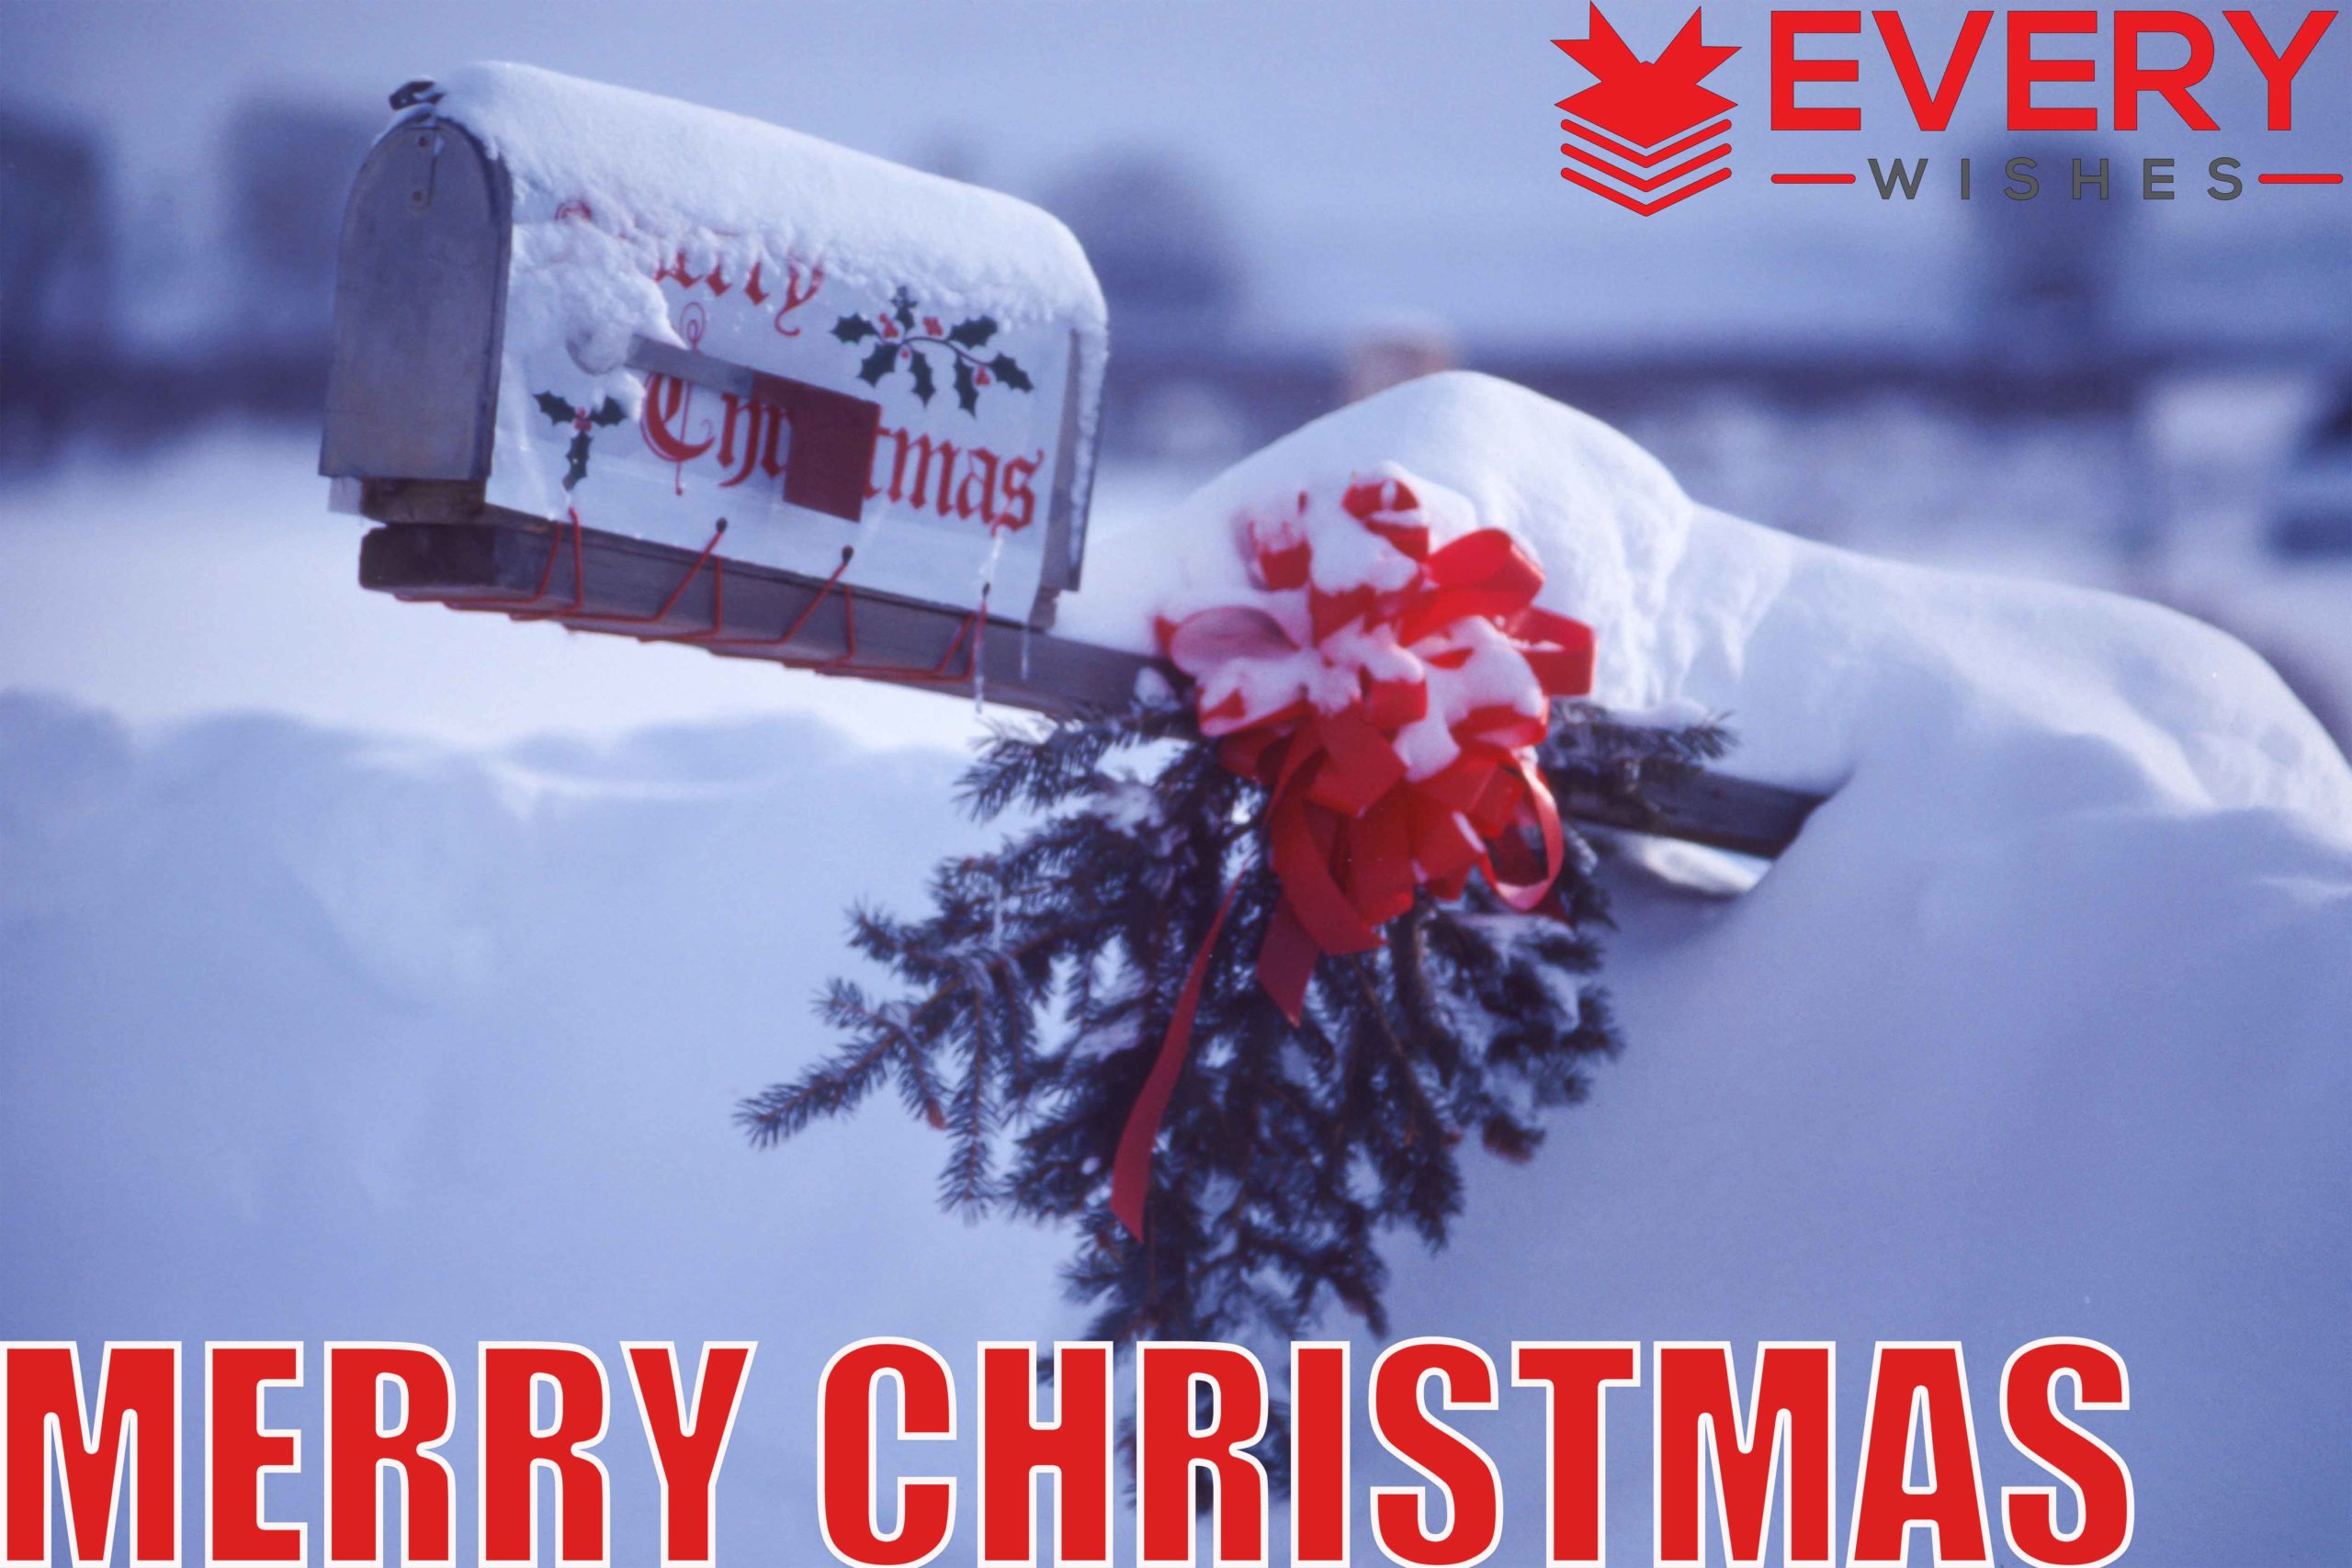 WE WISH YOU A MERRY CHRISTMAS | QUOTES | MESSAGES